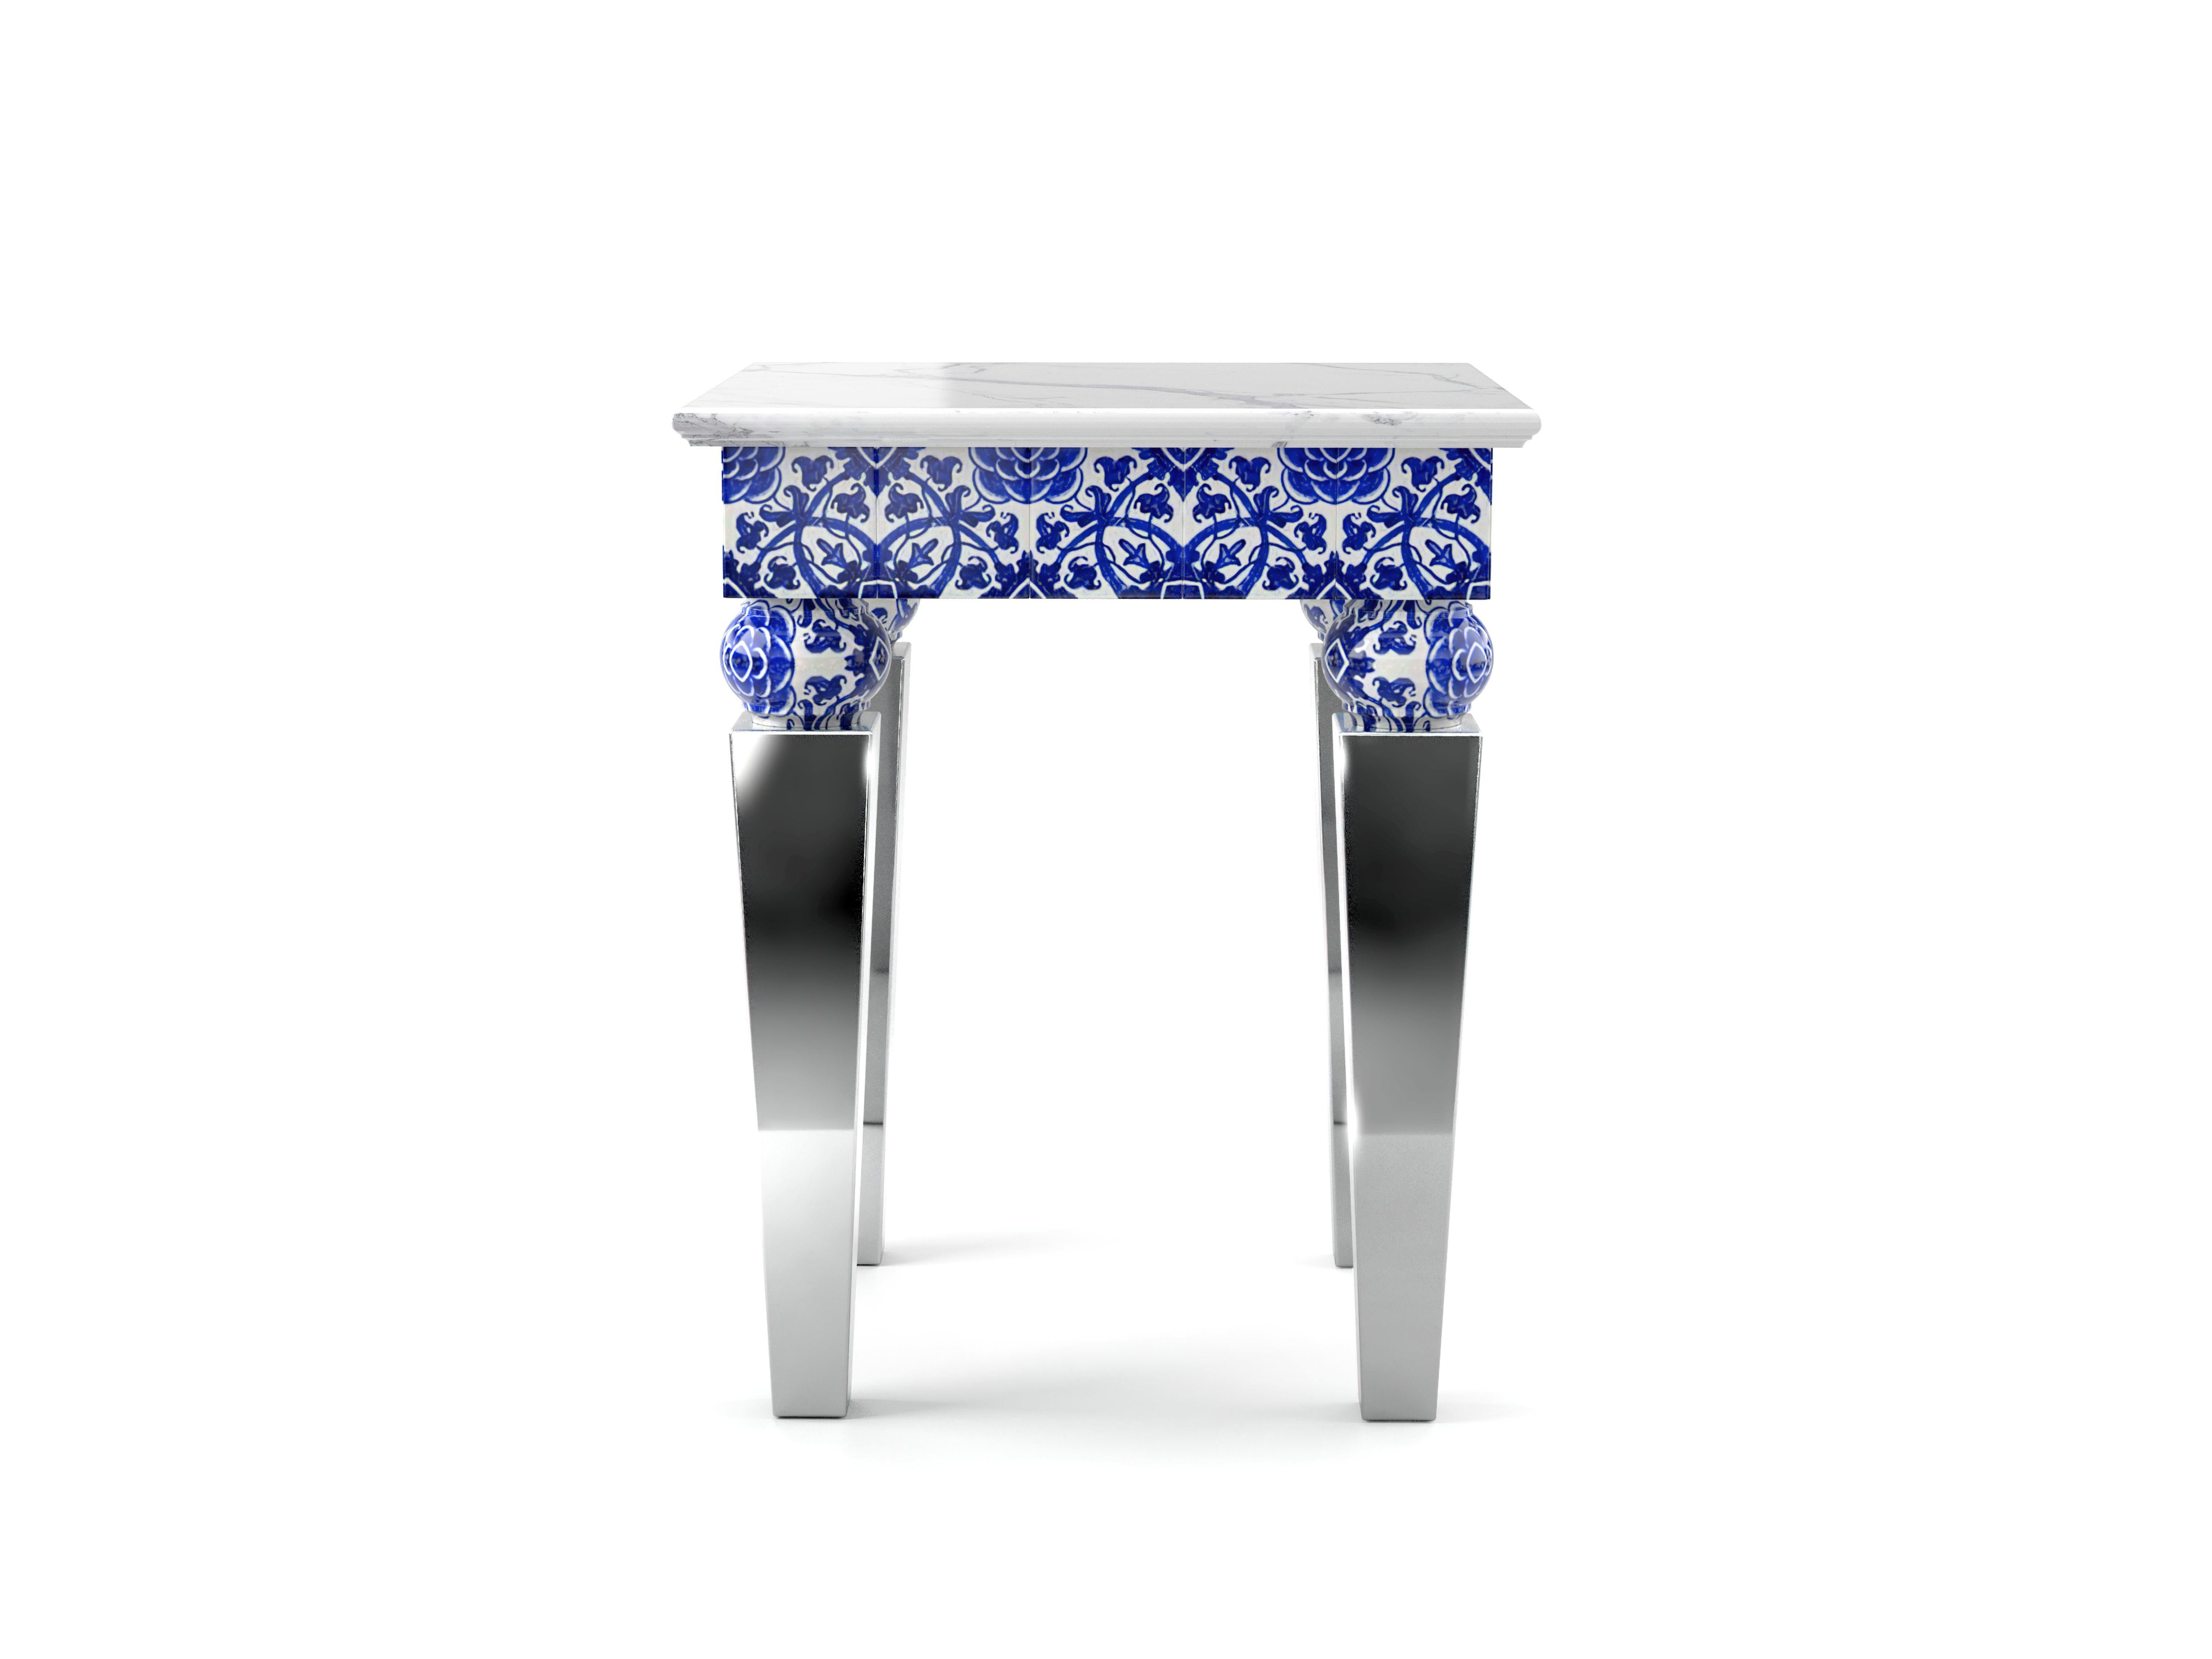 Italian Side Table White Marble Top Mirror Steel Legs Green Majolica Tiles, Also Outdoor For Sale